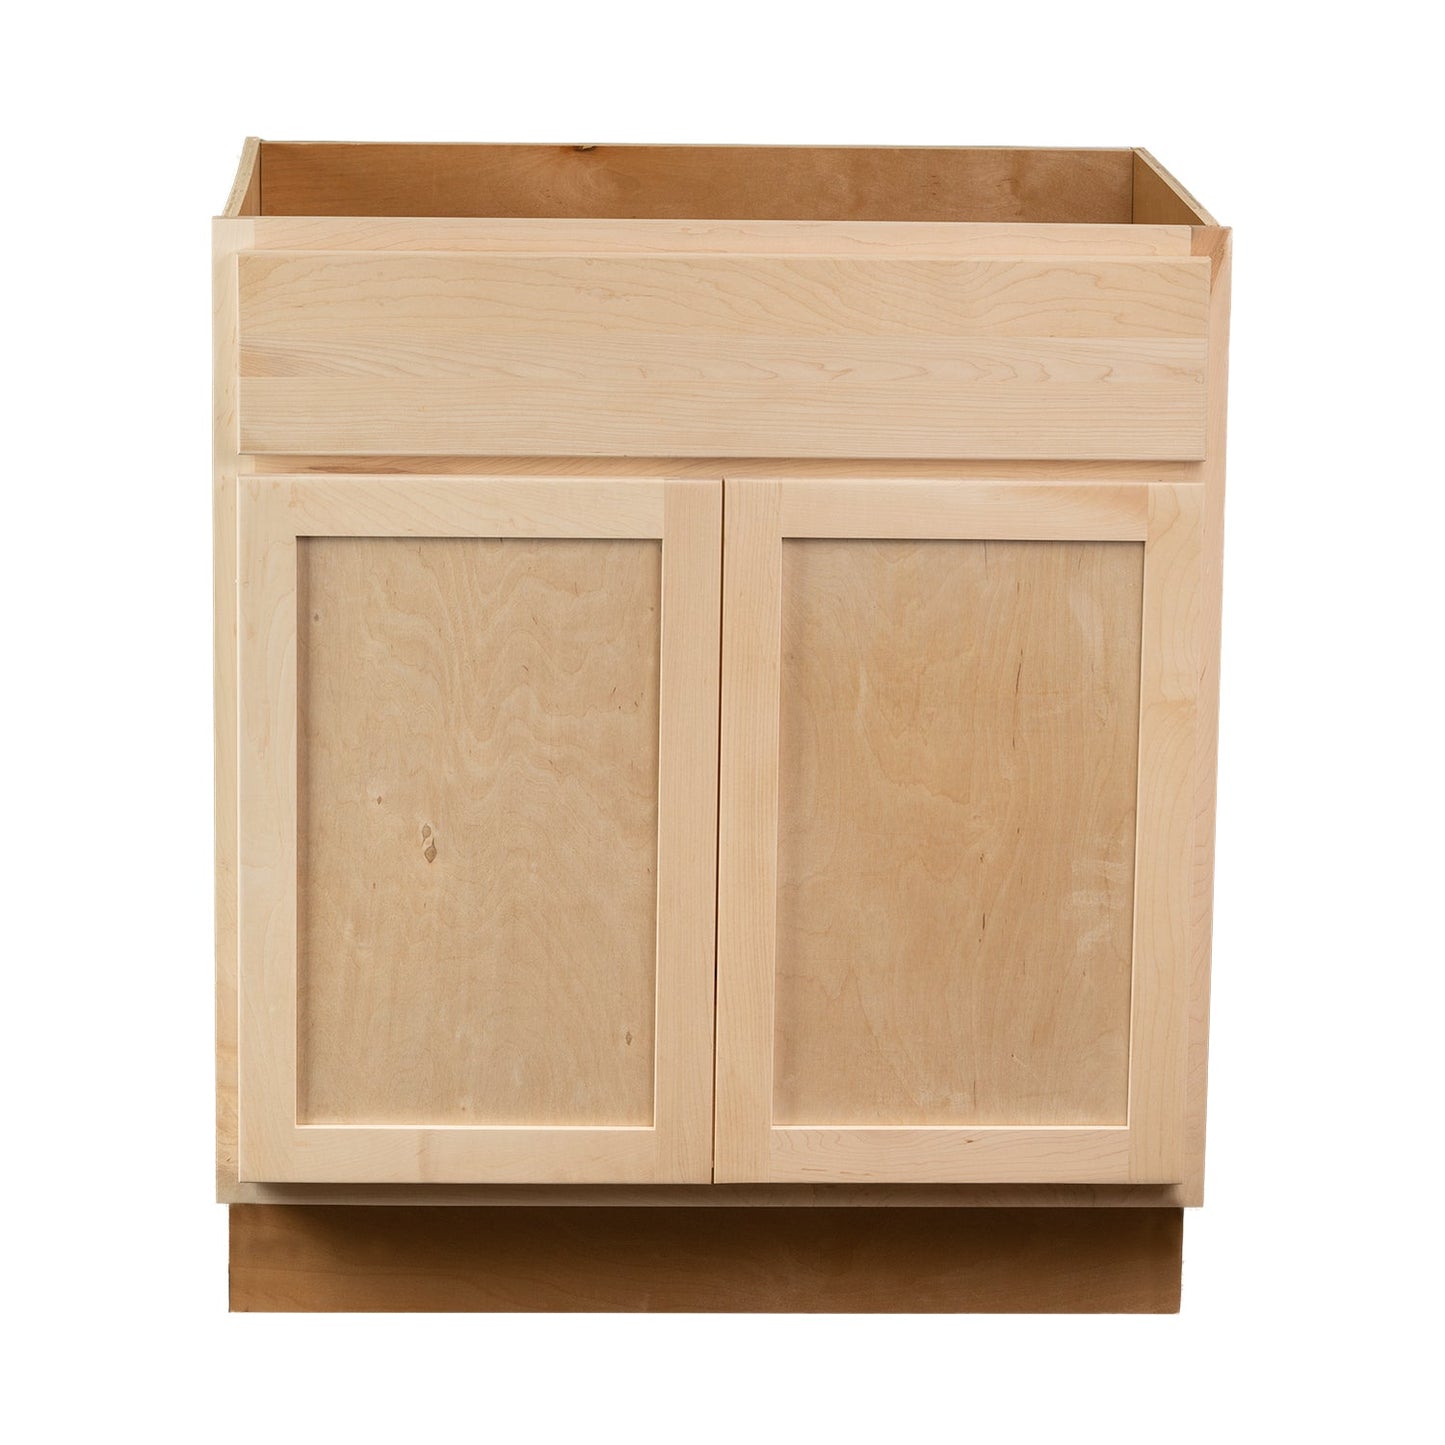 Quicklock RTA (Ready-to-Assemble) Raw Maple Vanity Base Cabinet | 36"Wx34.5"Hx18"D